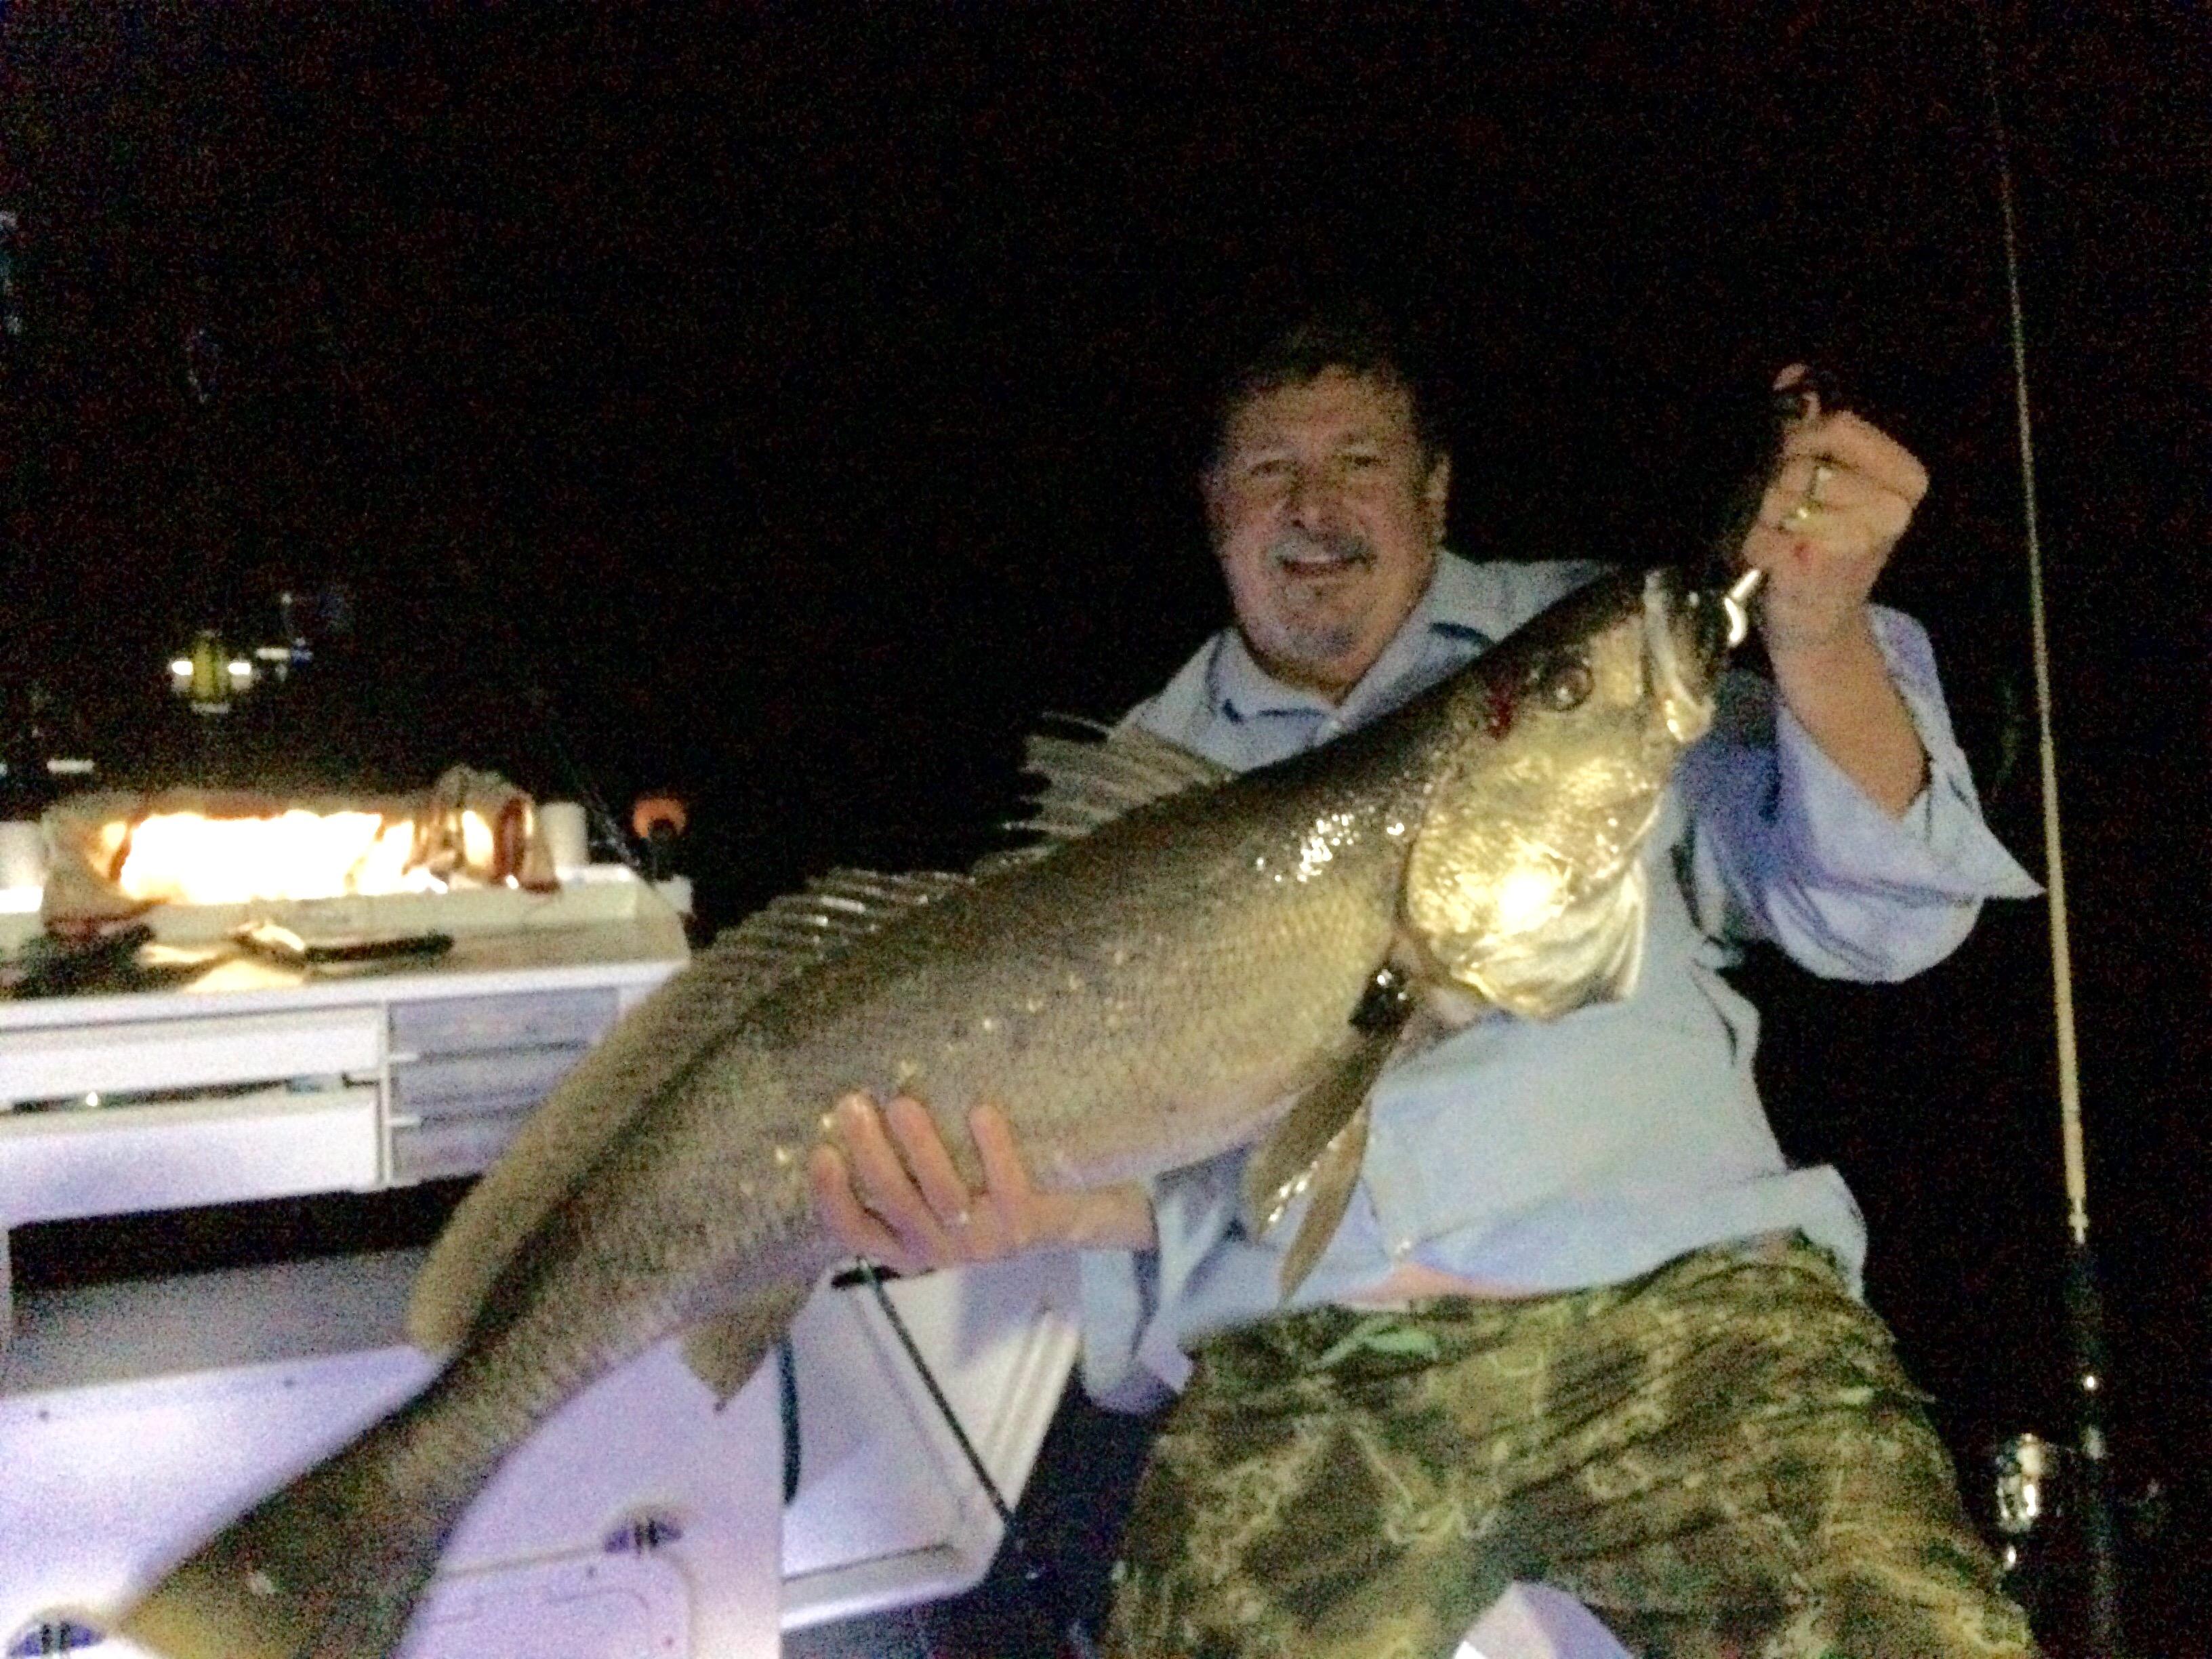 Rob Schomberg boated a sizeable jewfish.